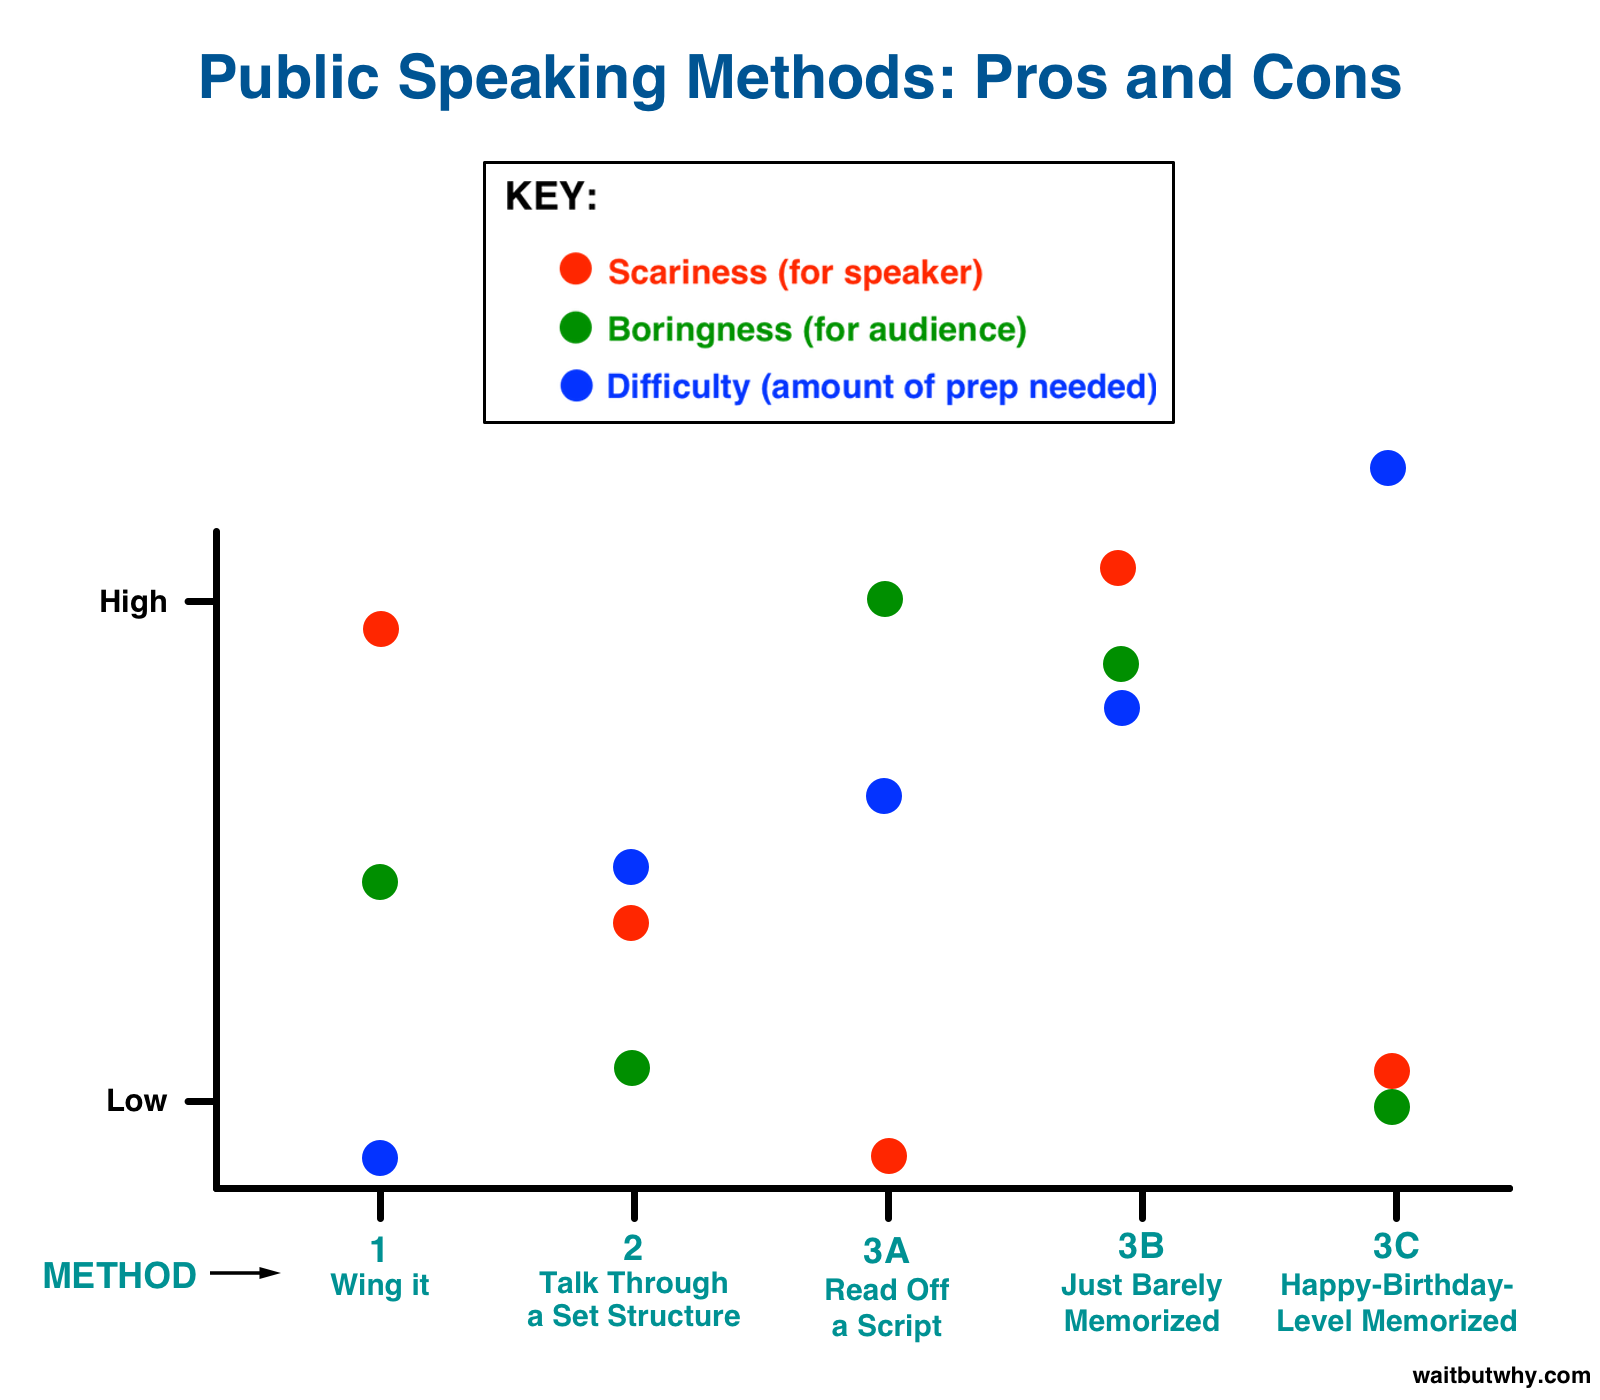 pros and cons of each speaking method plotted on a chart: winging it is the least difficult but most scary, fully memorized is the most difficult and least scary